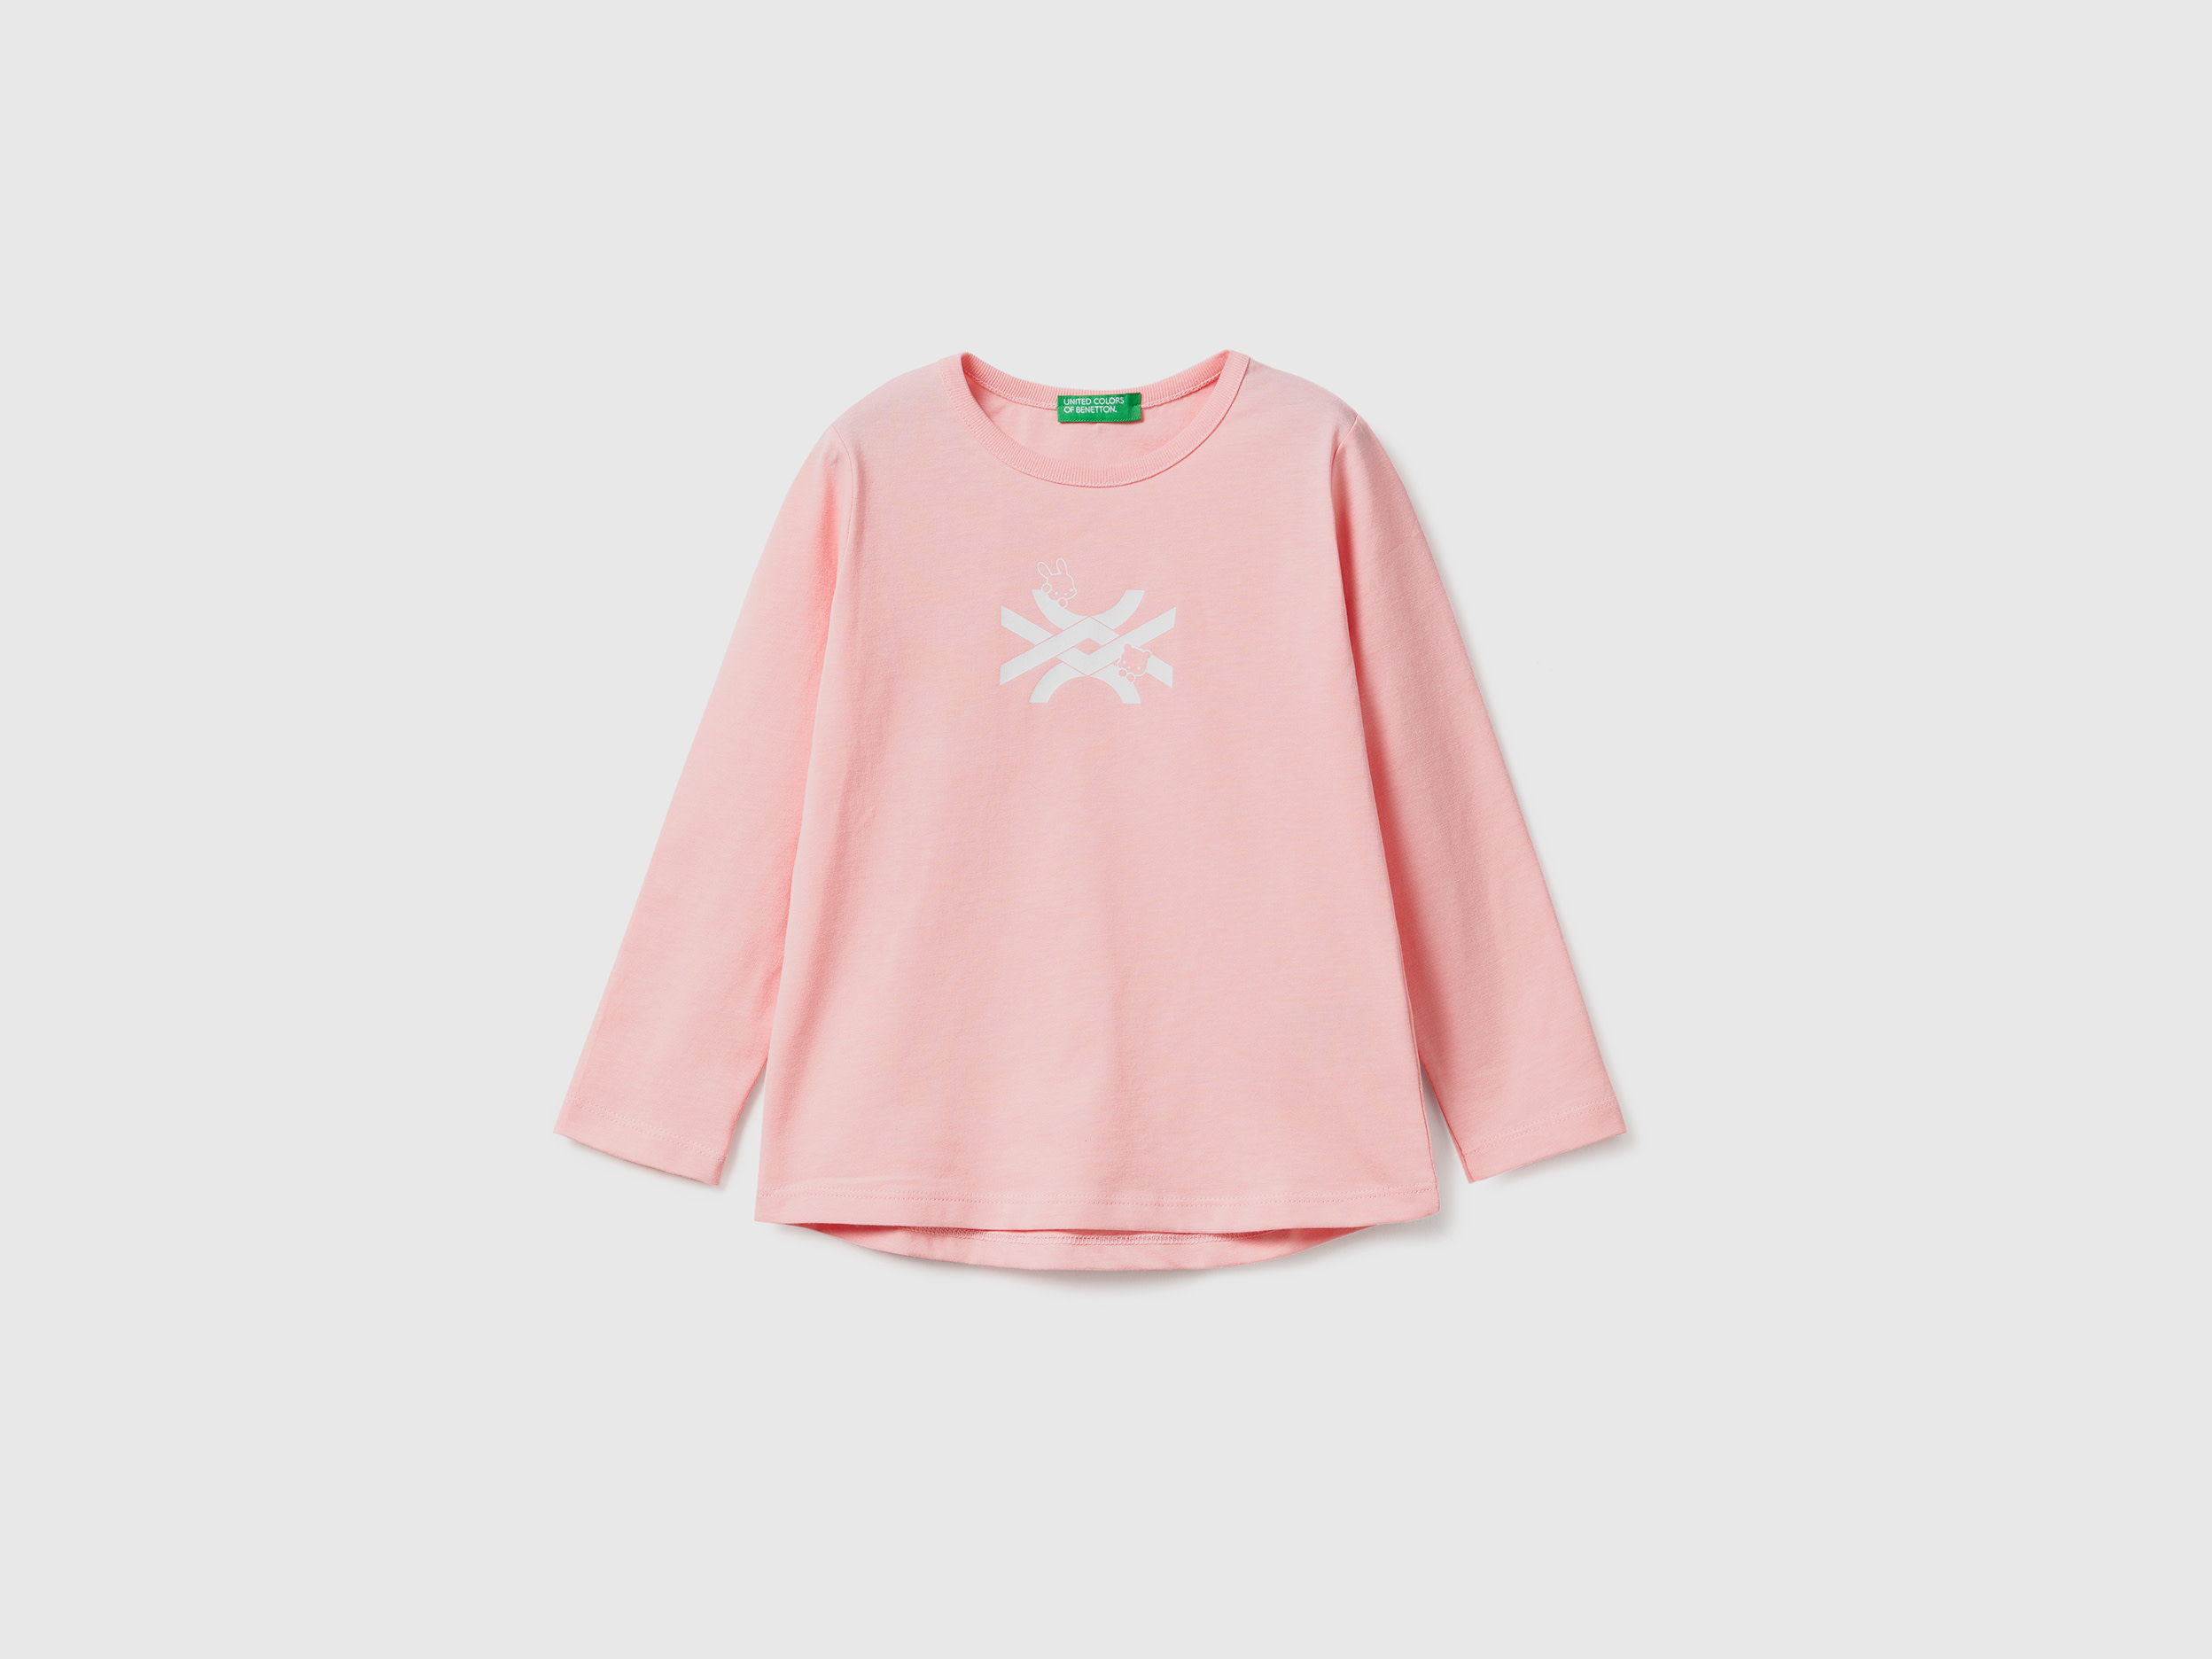 Benetton, 100% Cotton T-shirt With Logo, size 4-5, Pink, Kids